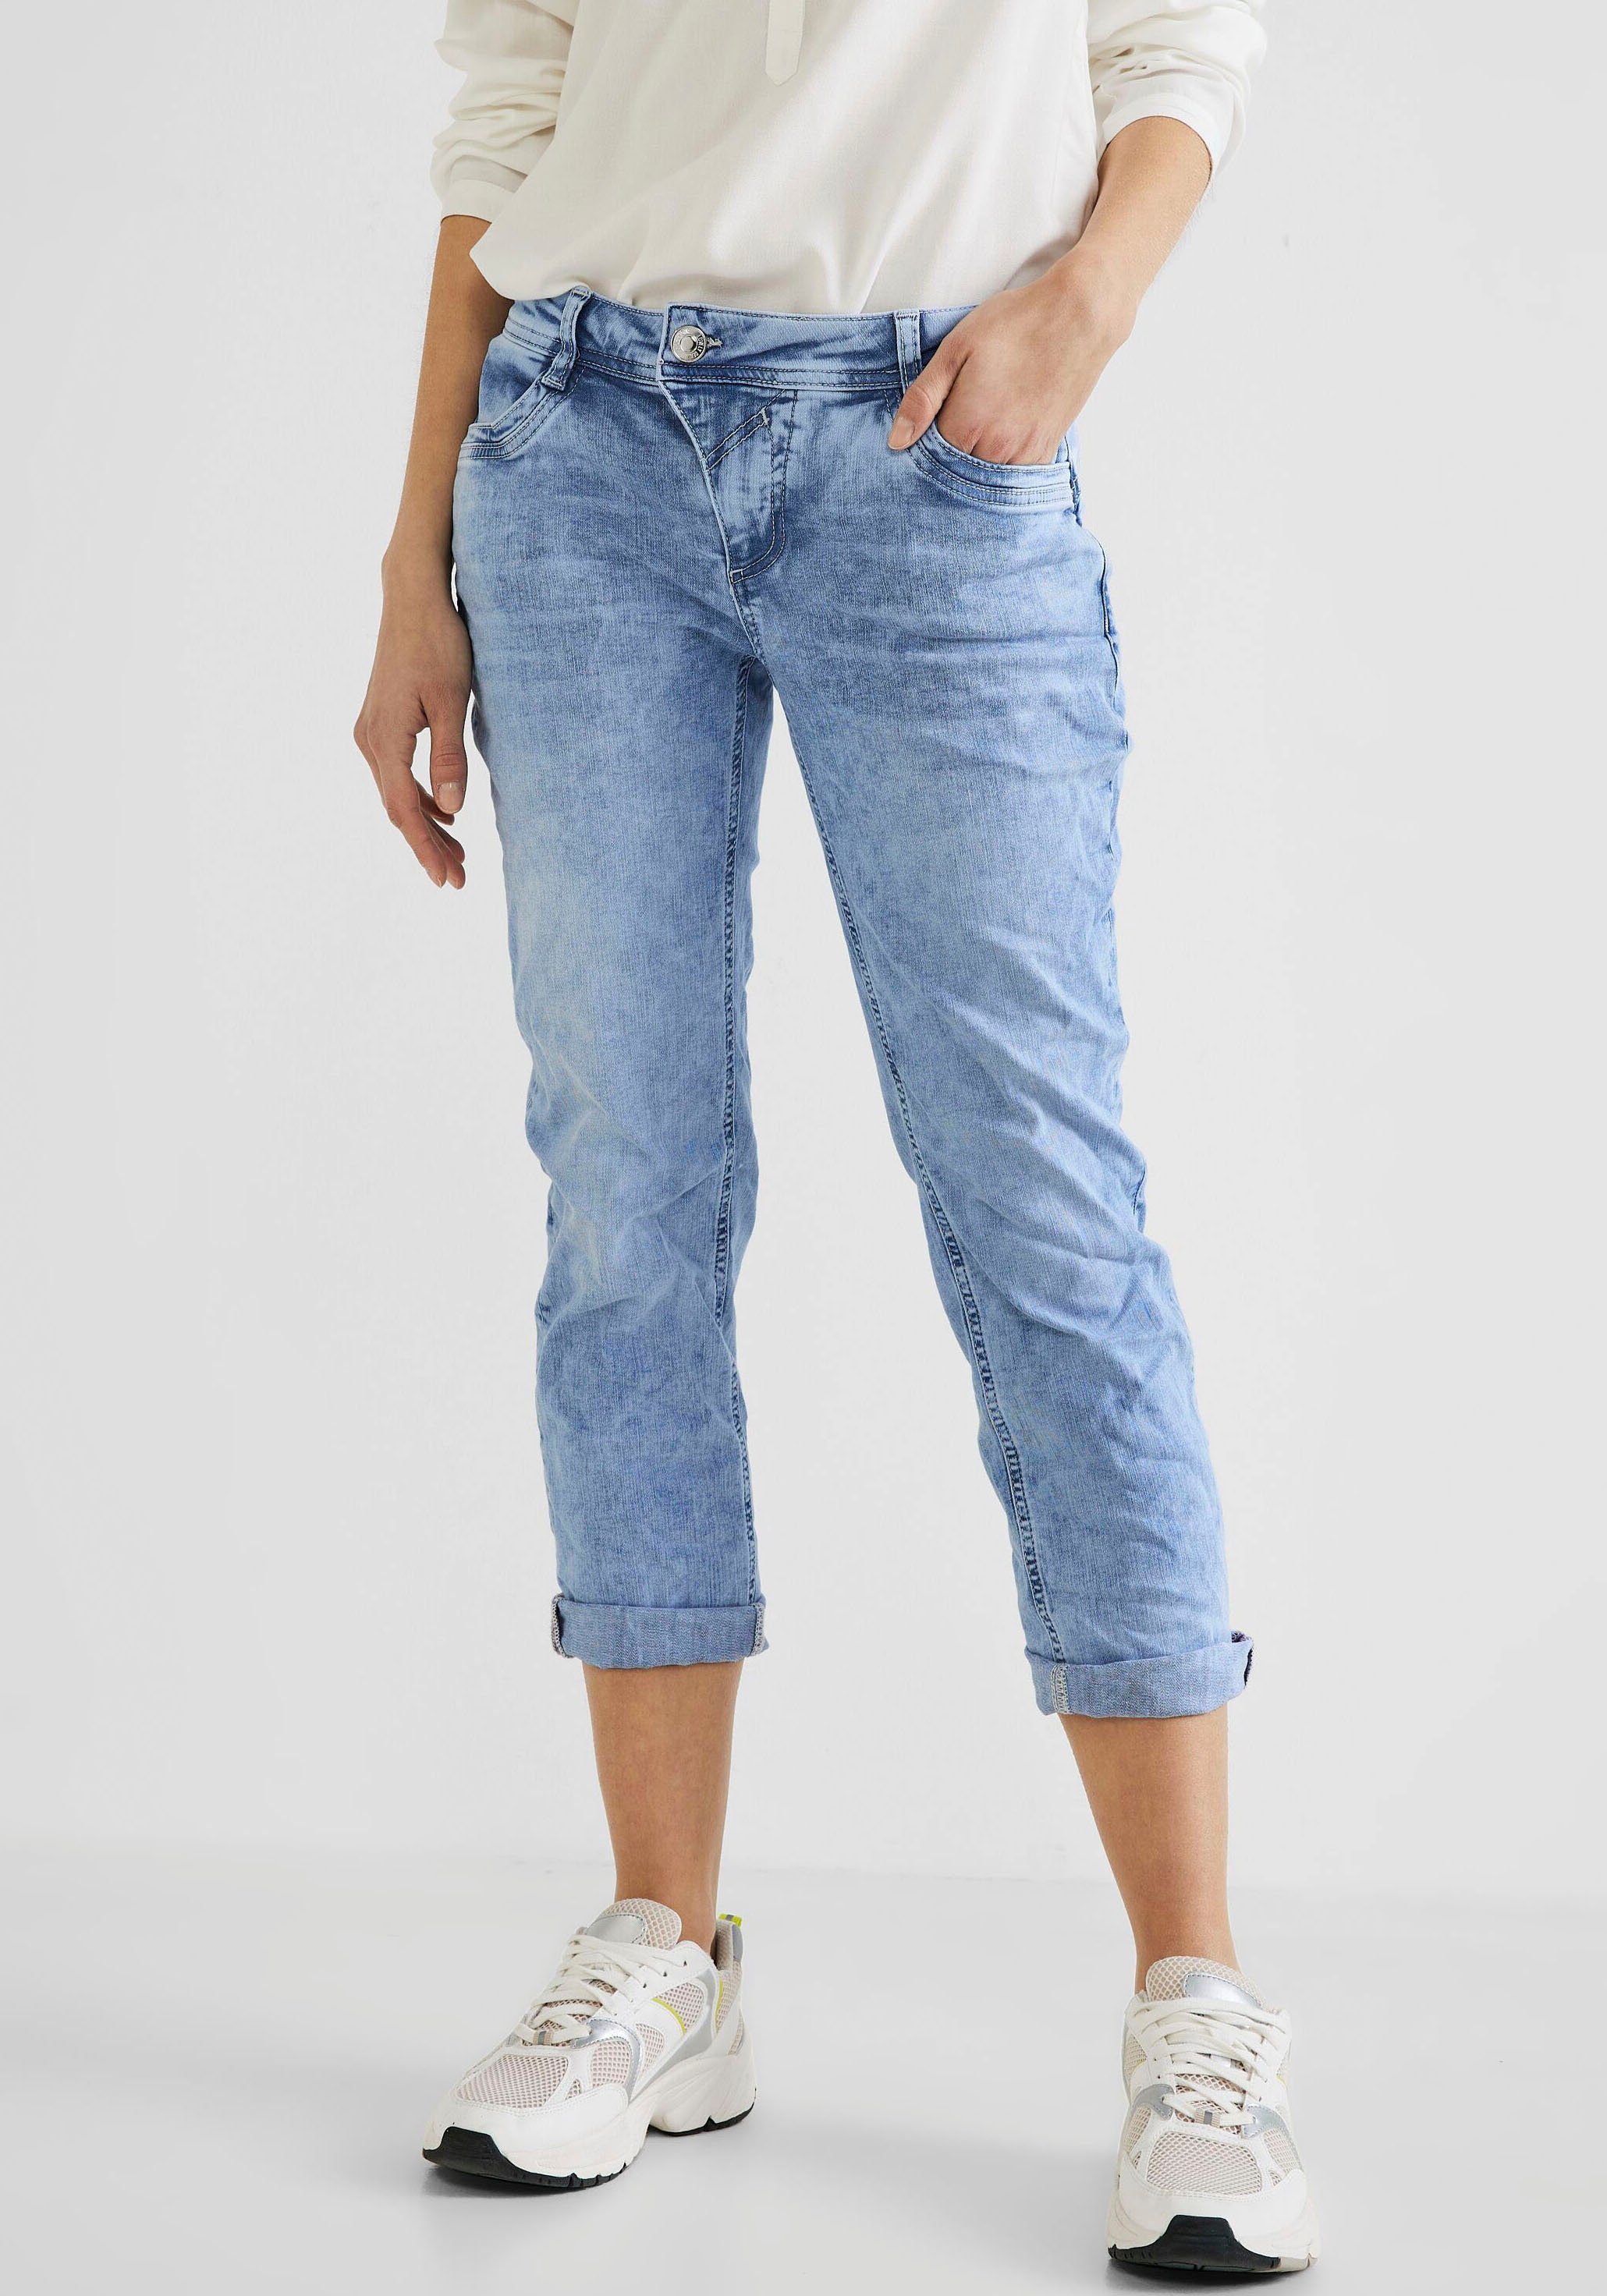 STREET ONE 3/4-Jeans Style Jane in hellblauer Waschung